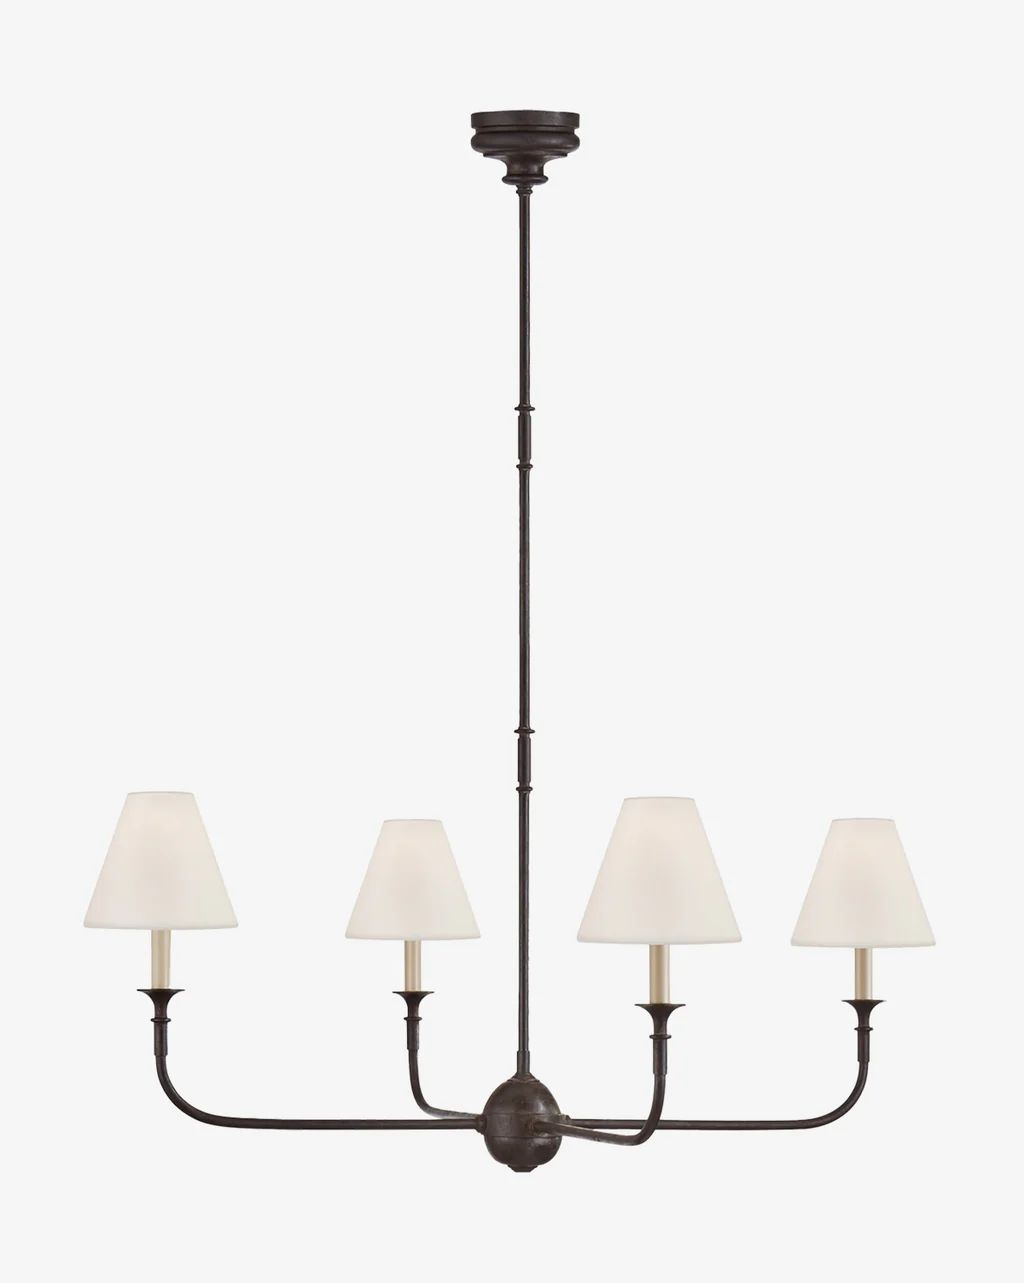 Piaf Oversized Chandelier | McGee & Co.